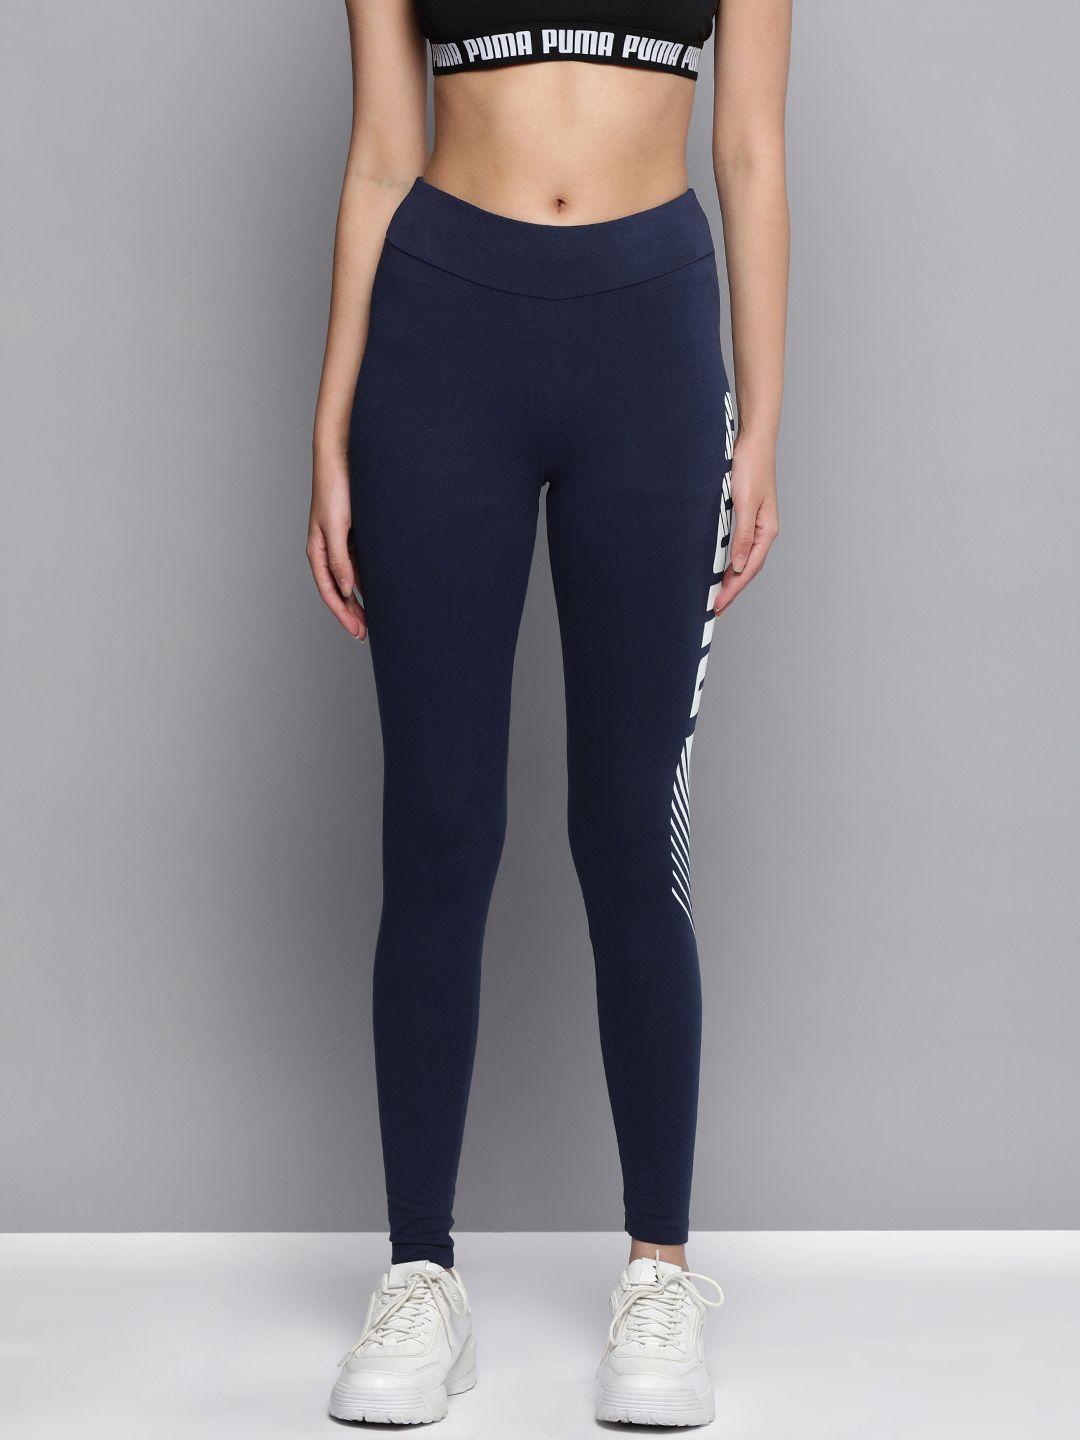 Puma Women Navy Blue & White Brand Logo Printed Essentials Graphic Tight Fit Tights Price in India